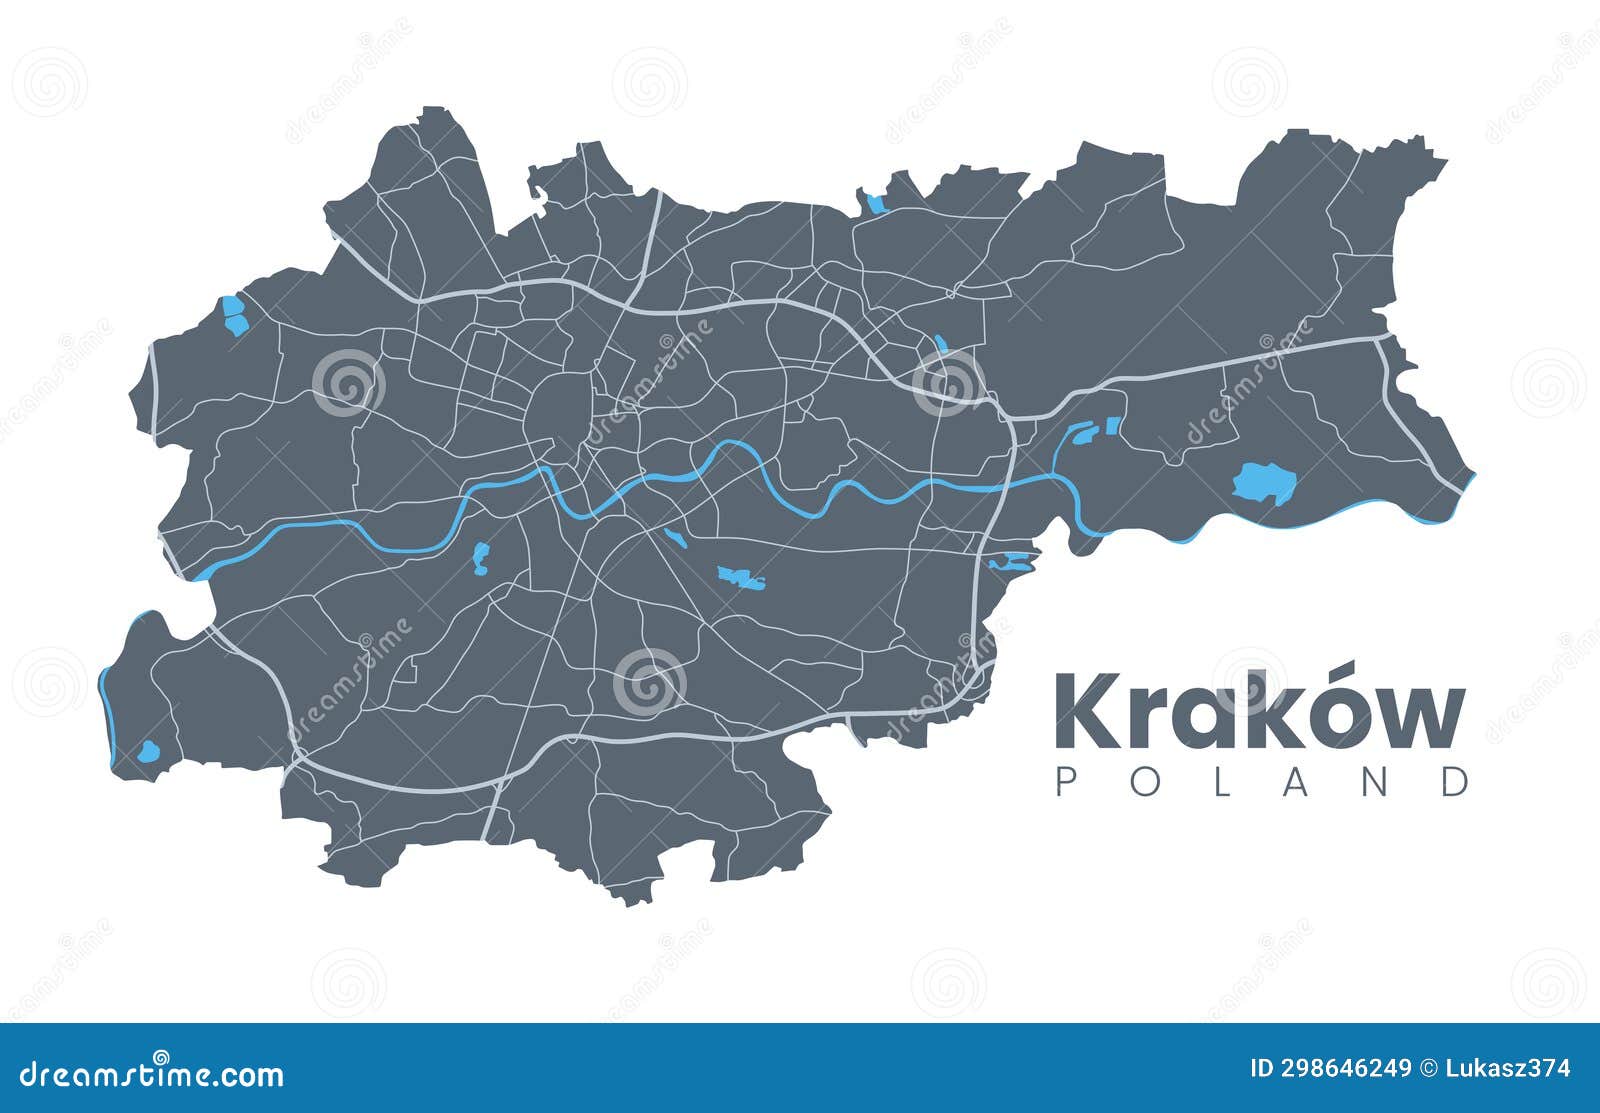 urban cracow map. city poster.